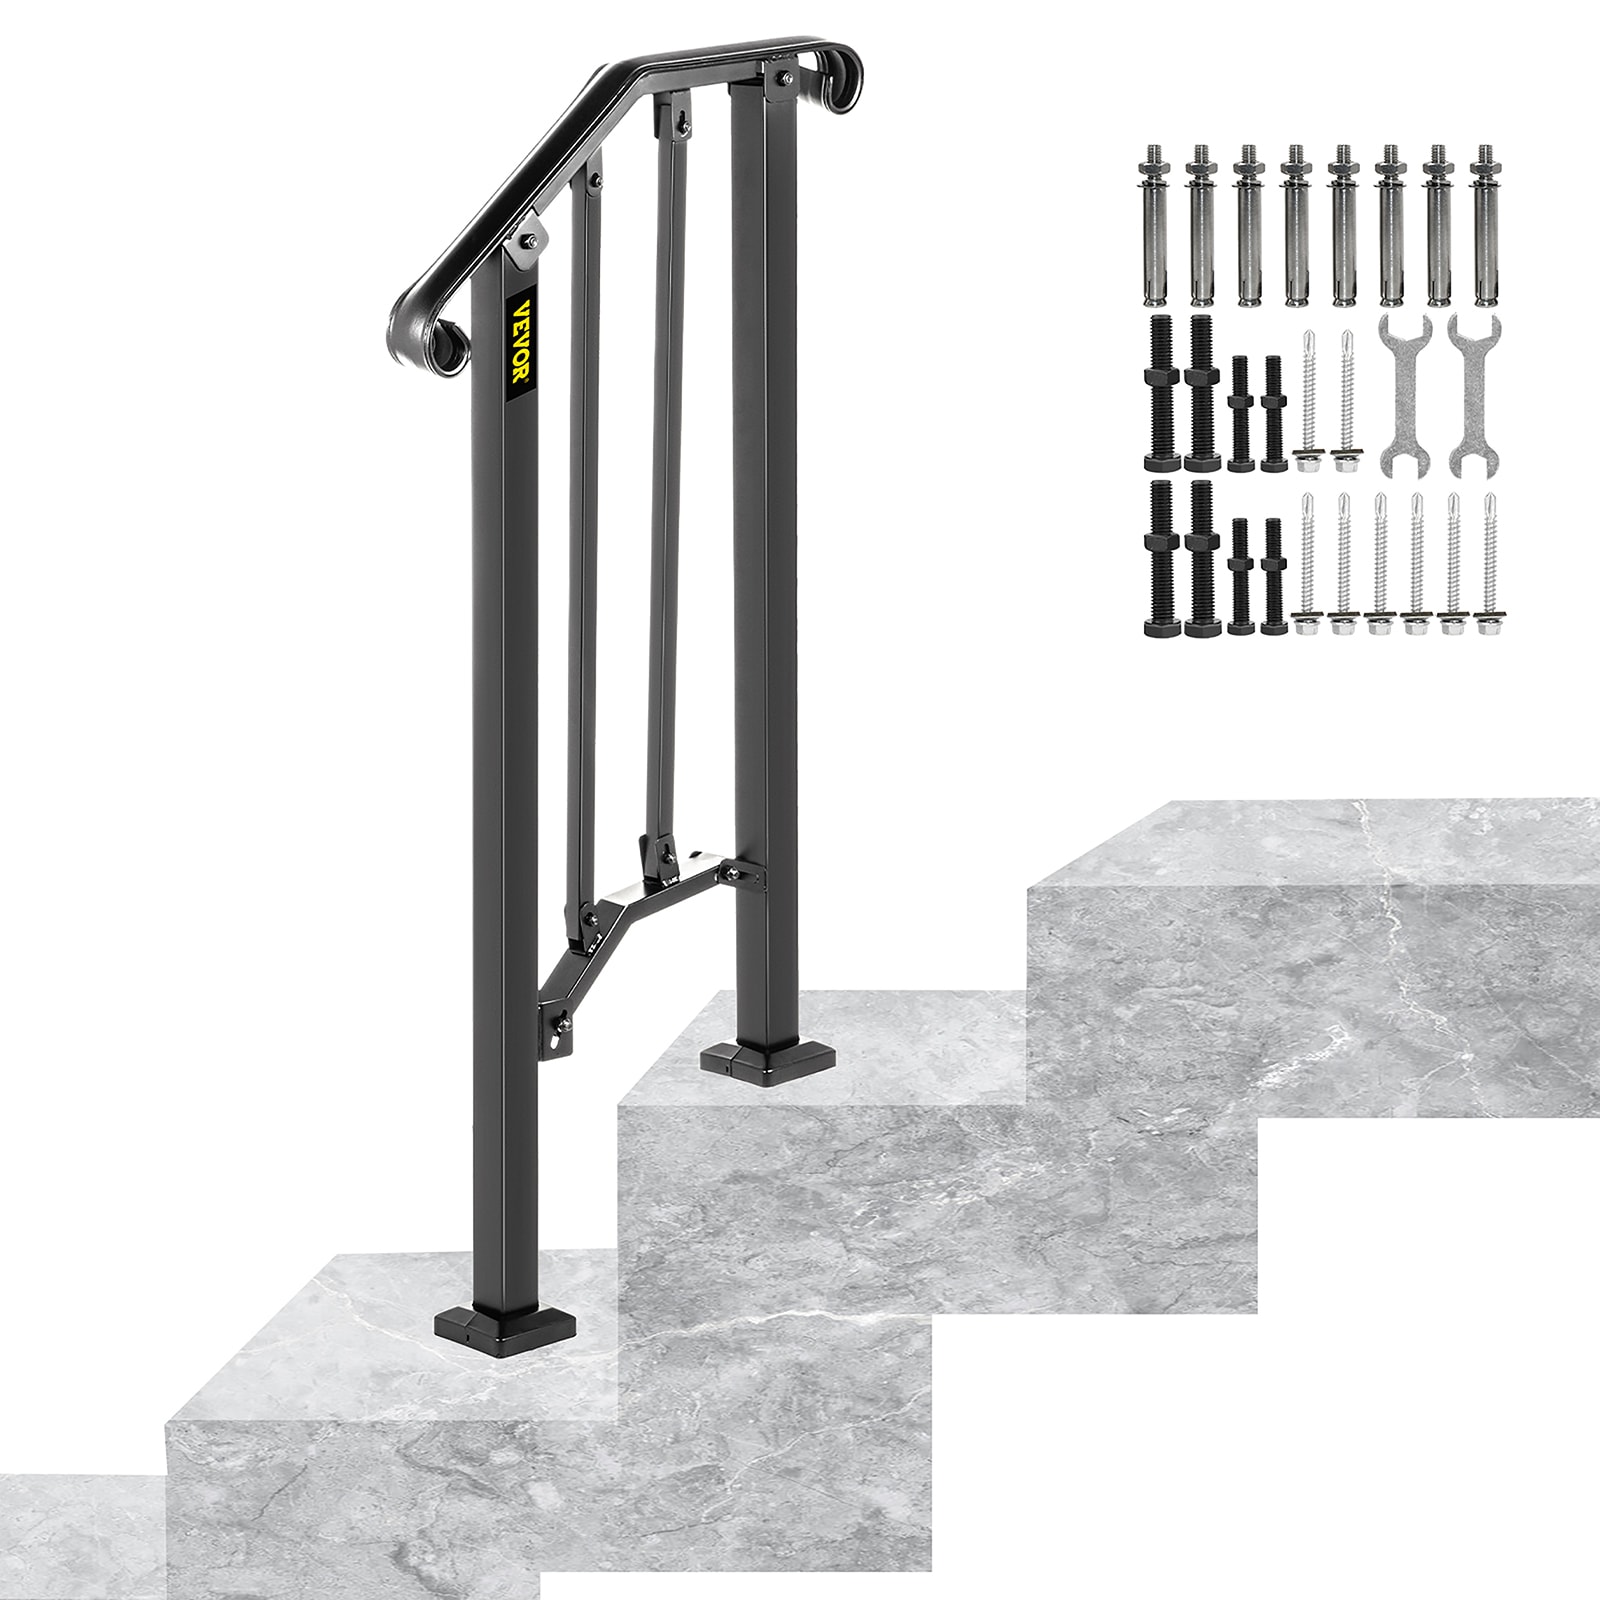 1-2 Steps Wrought Iron Handrail Step Ladders at Lowes.com